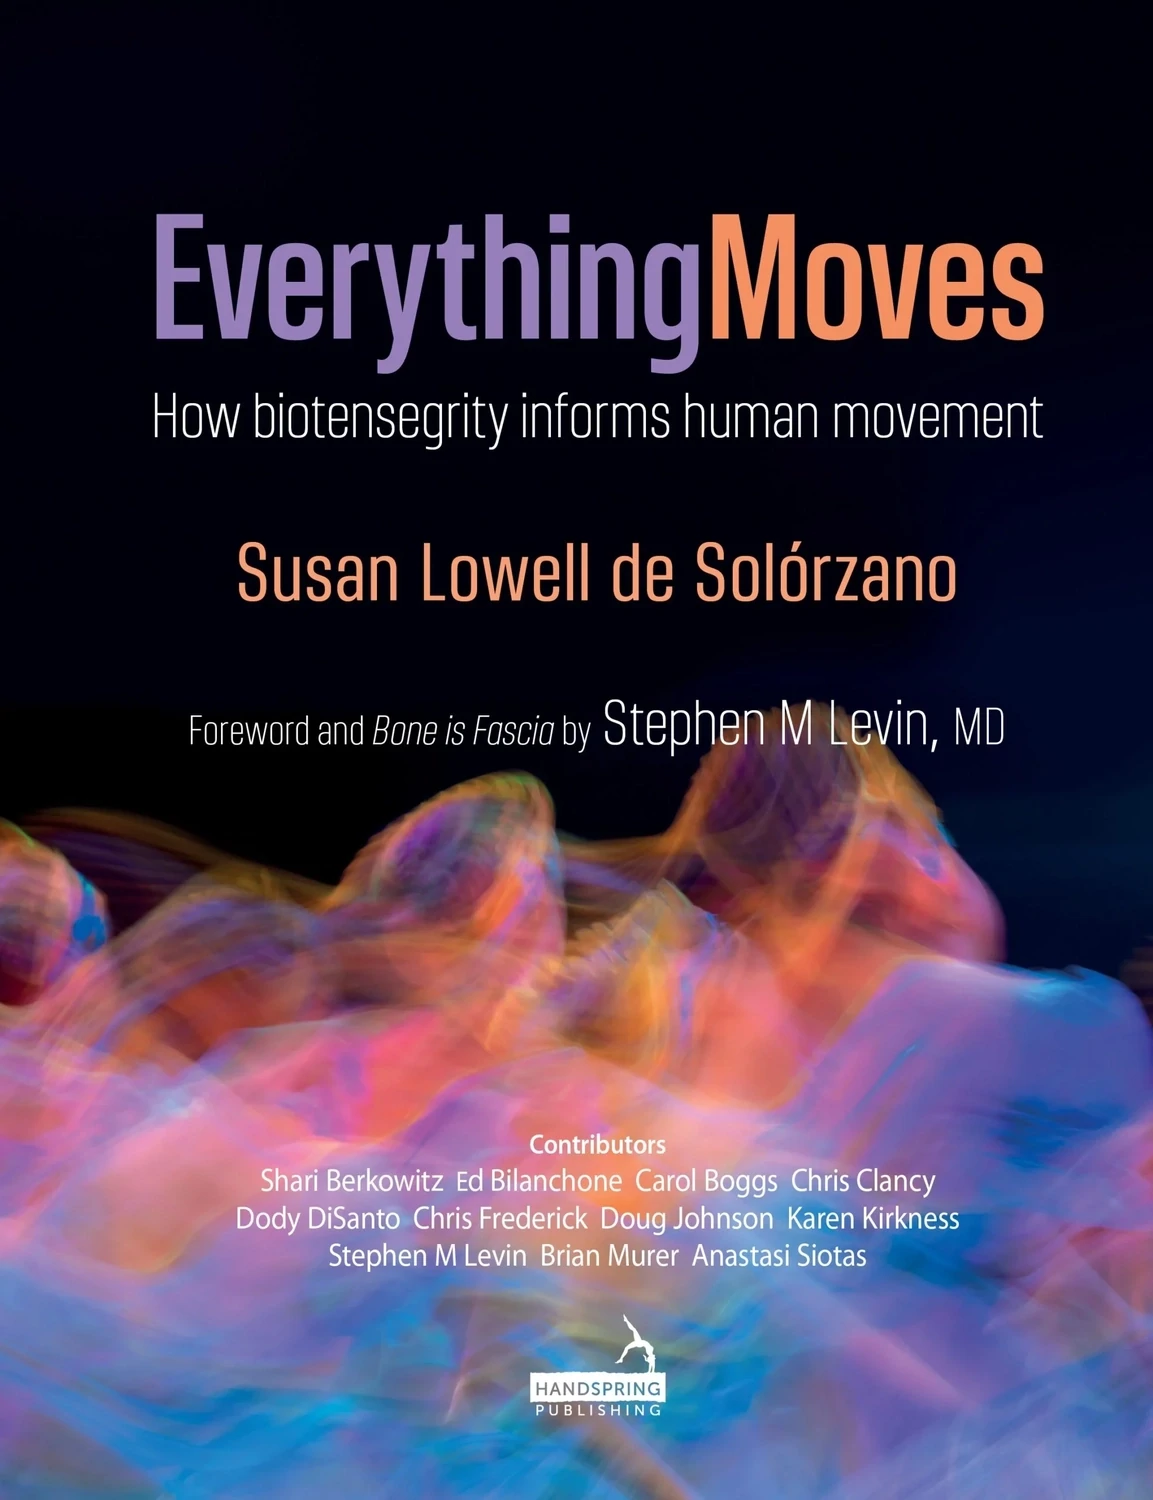 Everything Moves: How Biotensegrity Informs Human Movement